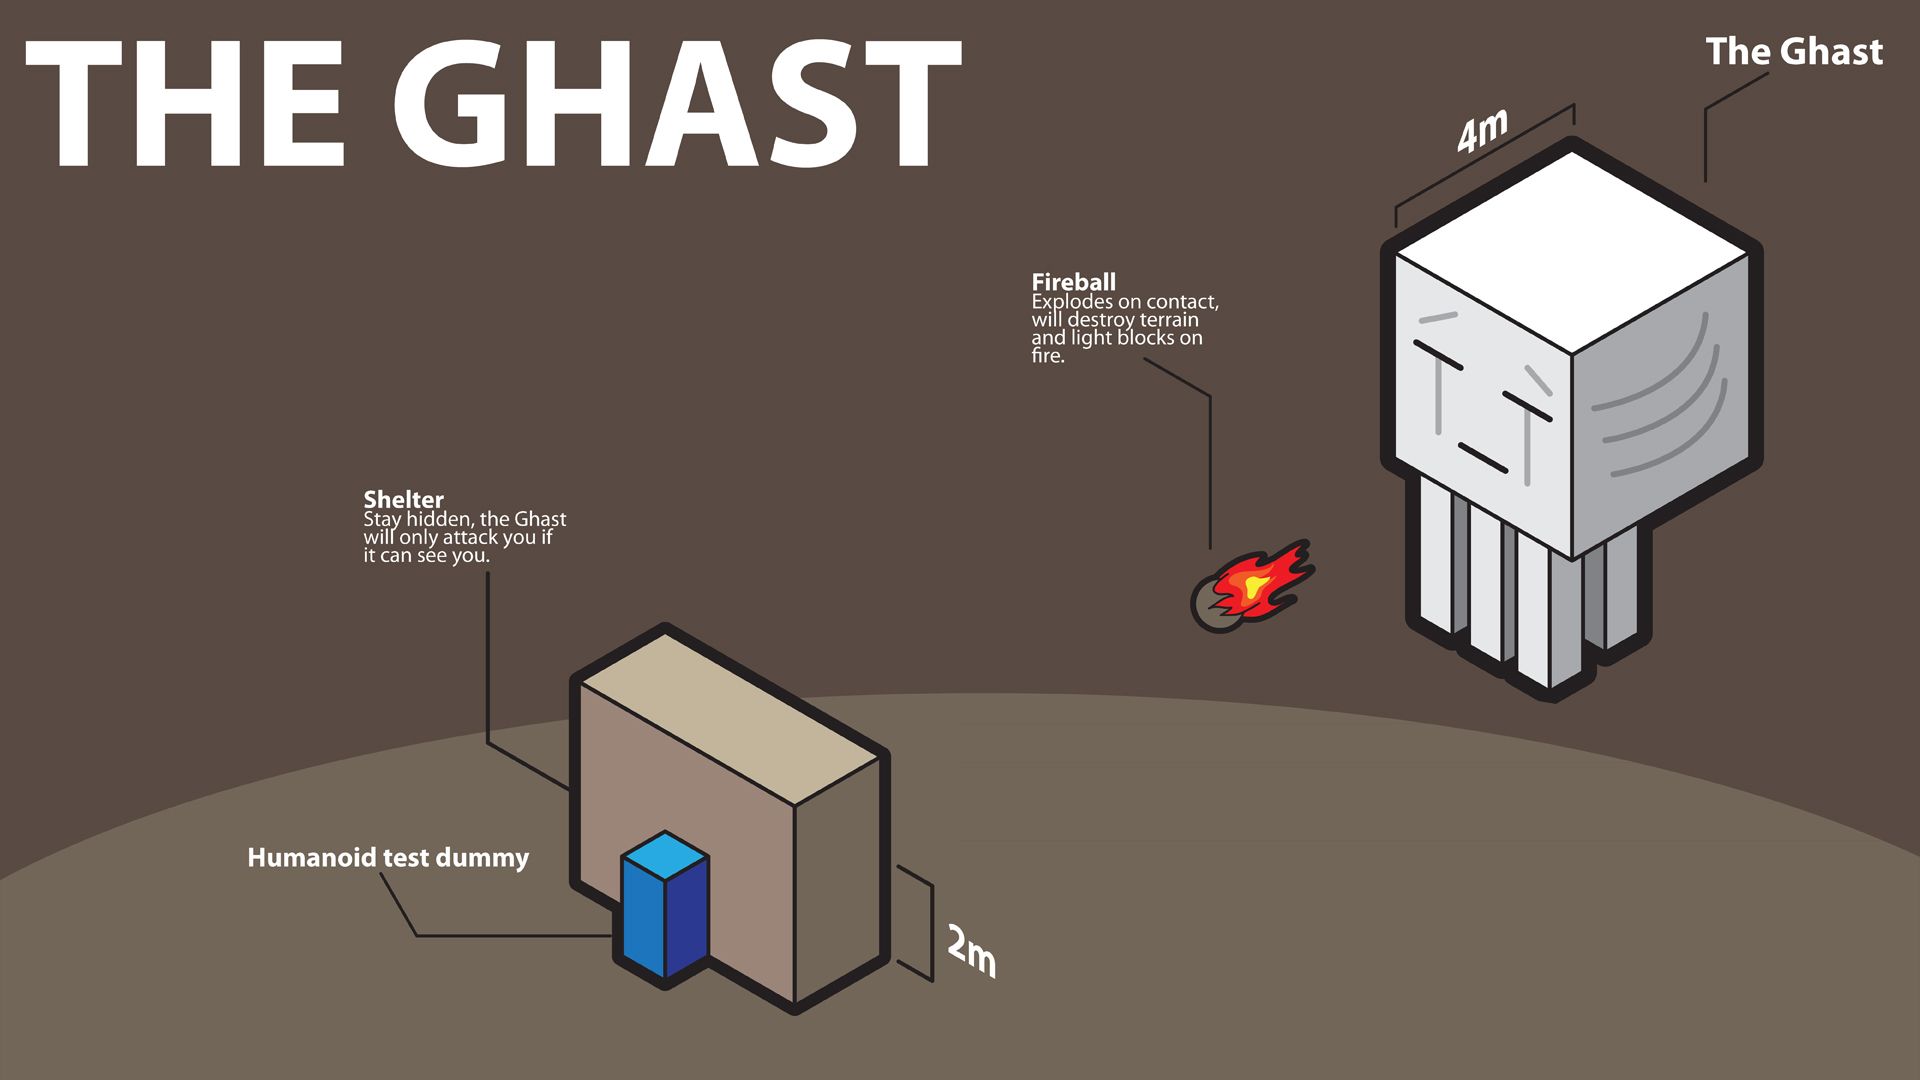 Free download The Ghast in a test Room Computer Wallpaper Desktop Background [1920x1080] for your Desktop, Mobile & Tablet. Explore Minecraft Wallpaper Maker with Skins. Make Your Own Minecraft